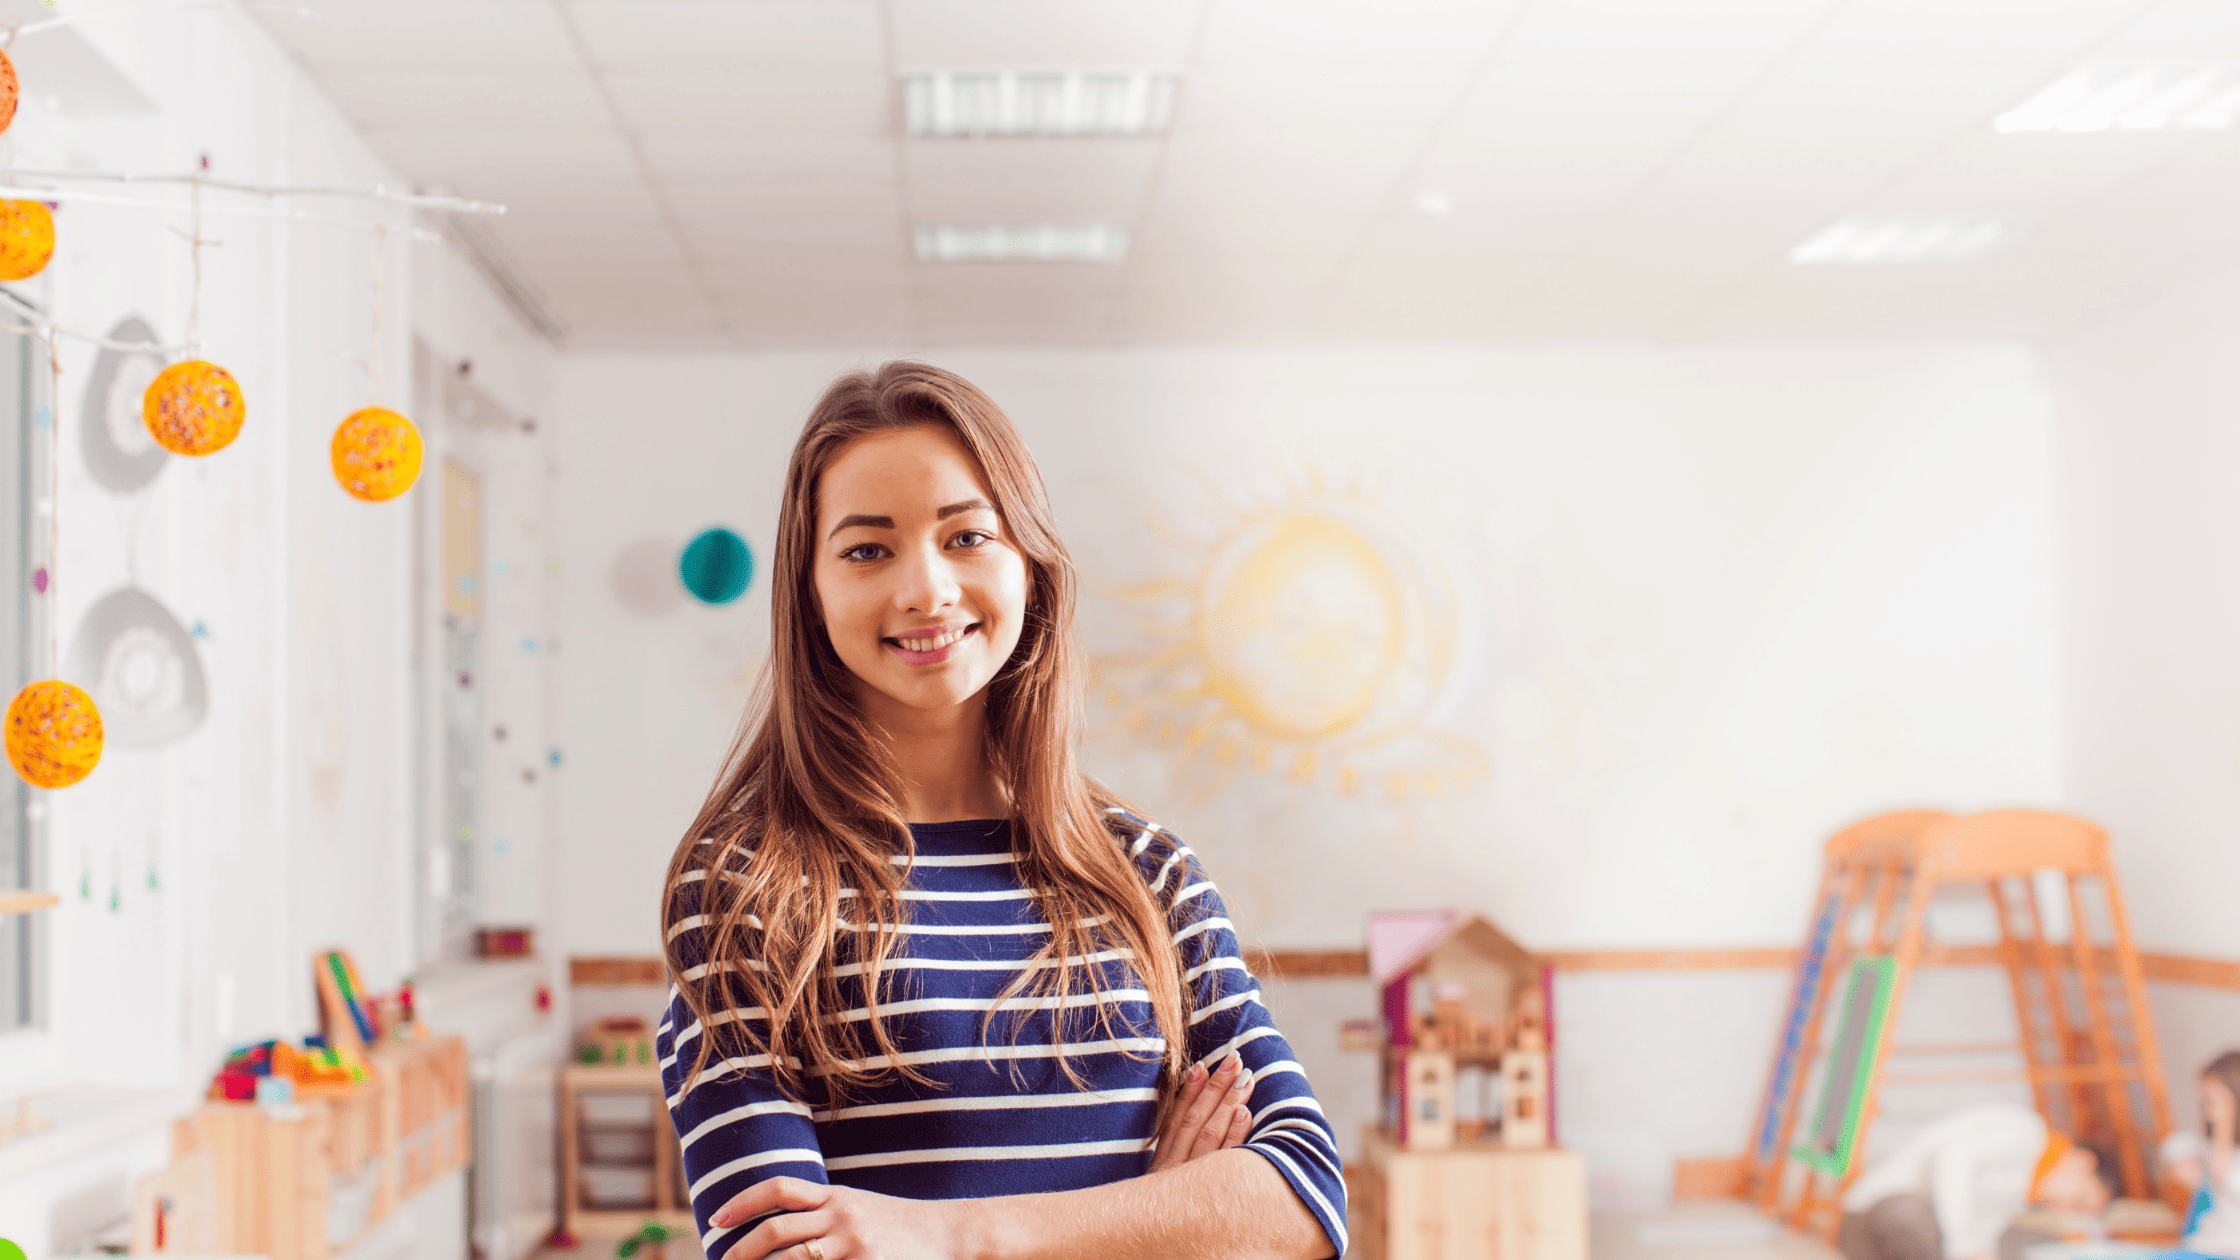 Female early childhood educator in classroom